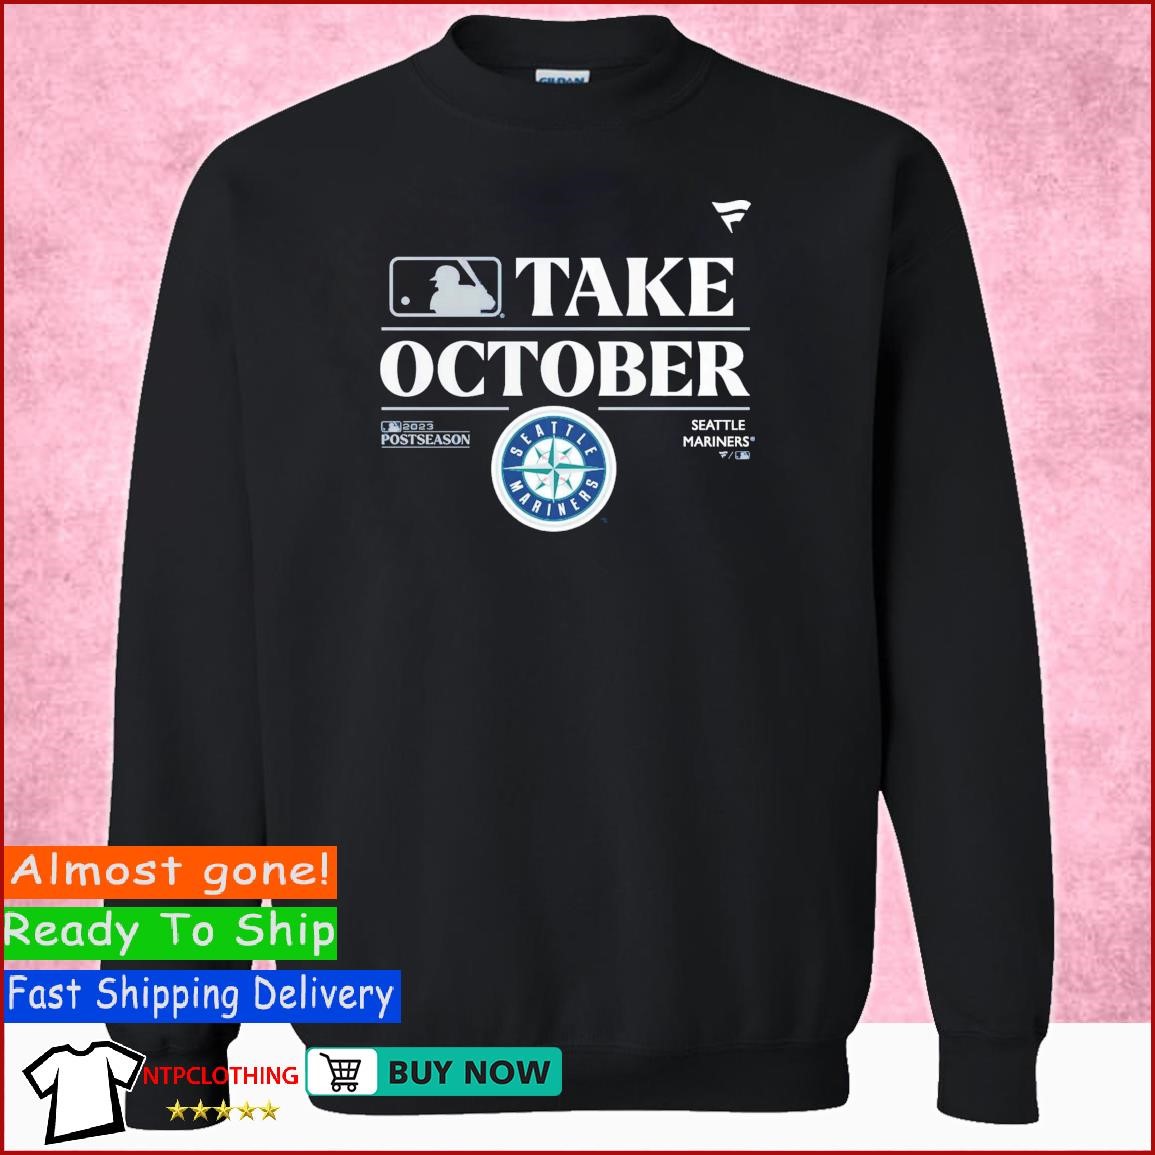 Official Seattle Mariners Playoffs Gear, Mariners Postseason Tees